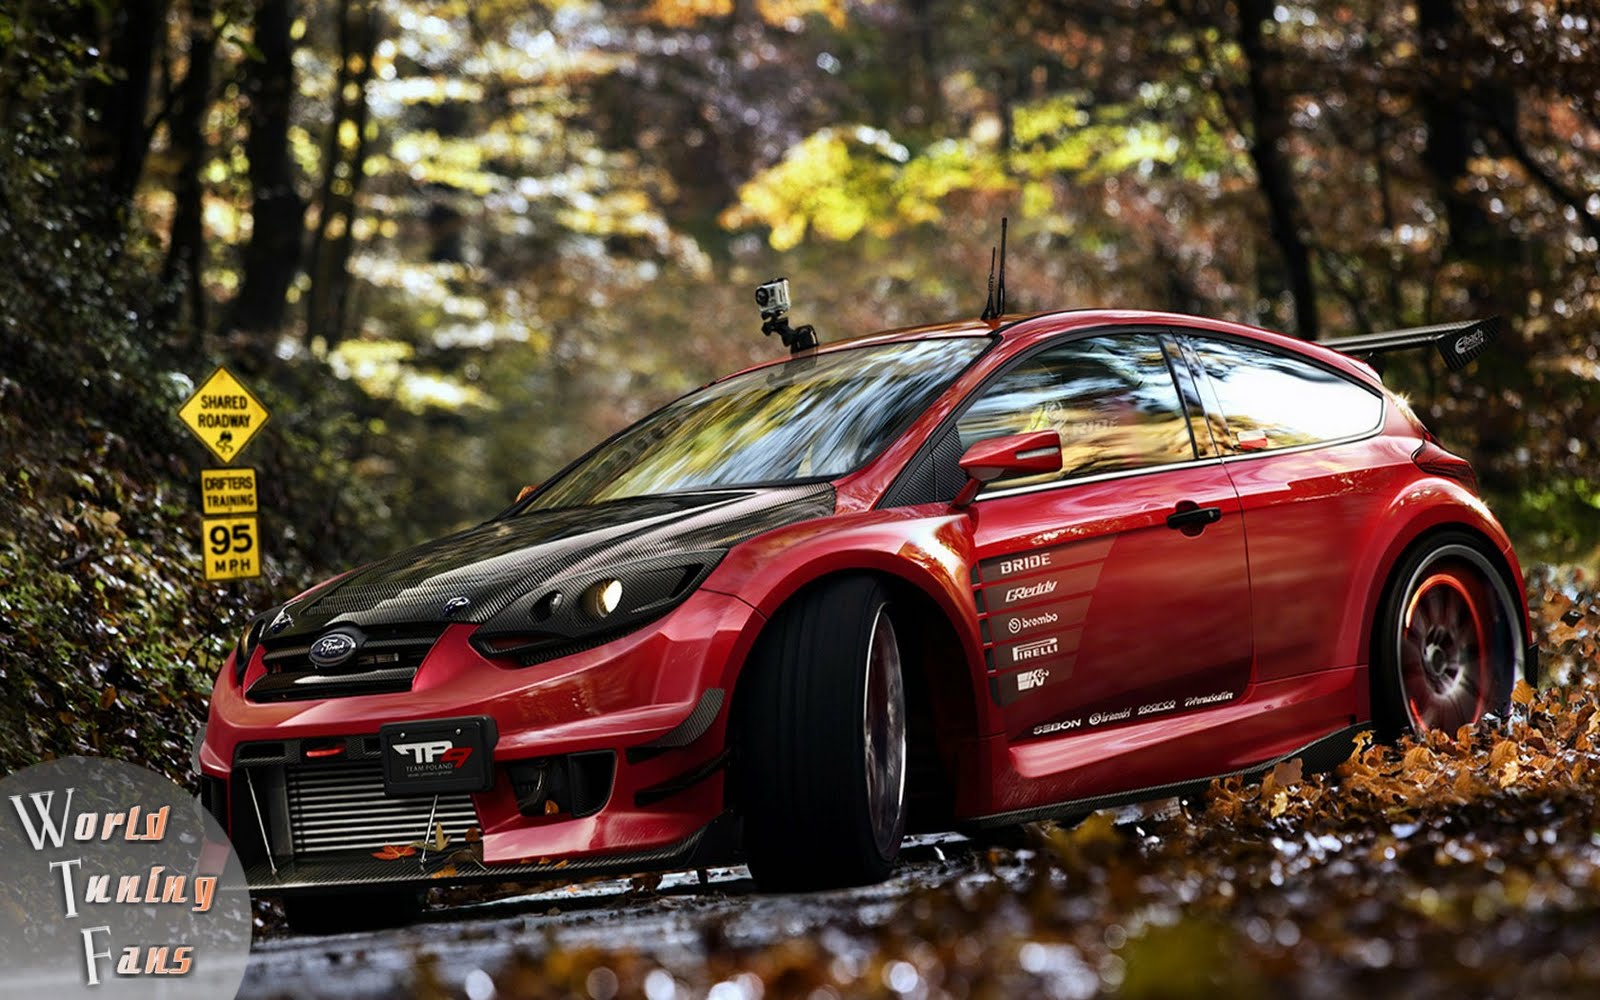 World Tuning Fans: Cool Car art collection, view more at http